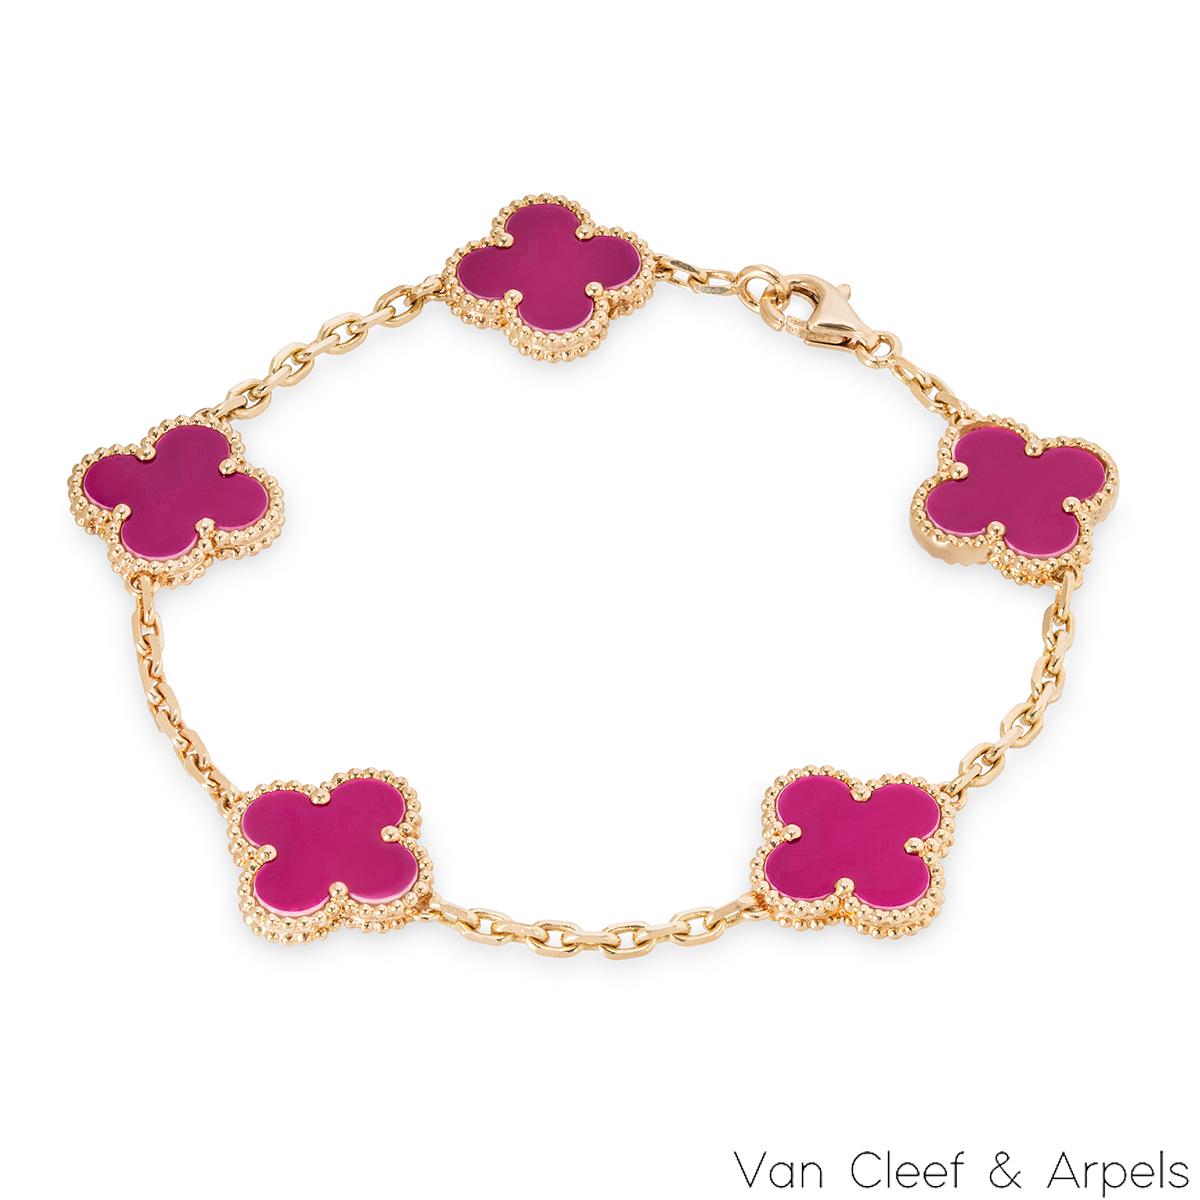 A gorgeous 18k rose gold porcelain bracelet by Van Cleef & Arpels from the Vintage Alhambra collection. The bracelet features 5 iconic 4 leaf clover motifs, each set with a beaded edge and a raspberry pink sèvres porcelain inlay, set throughout the